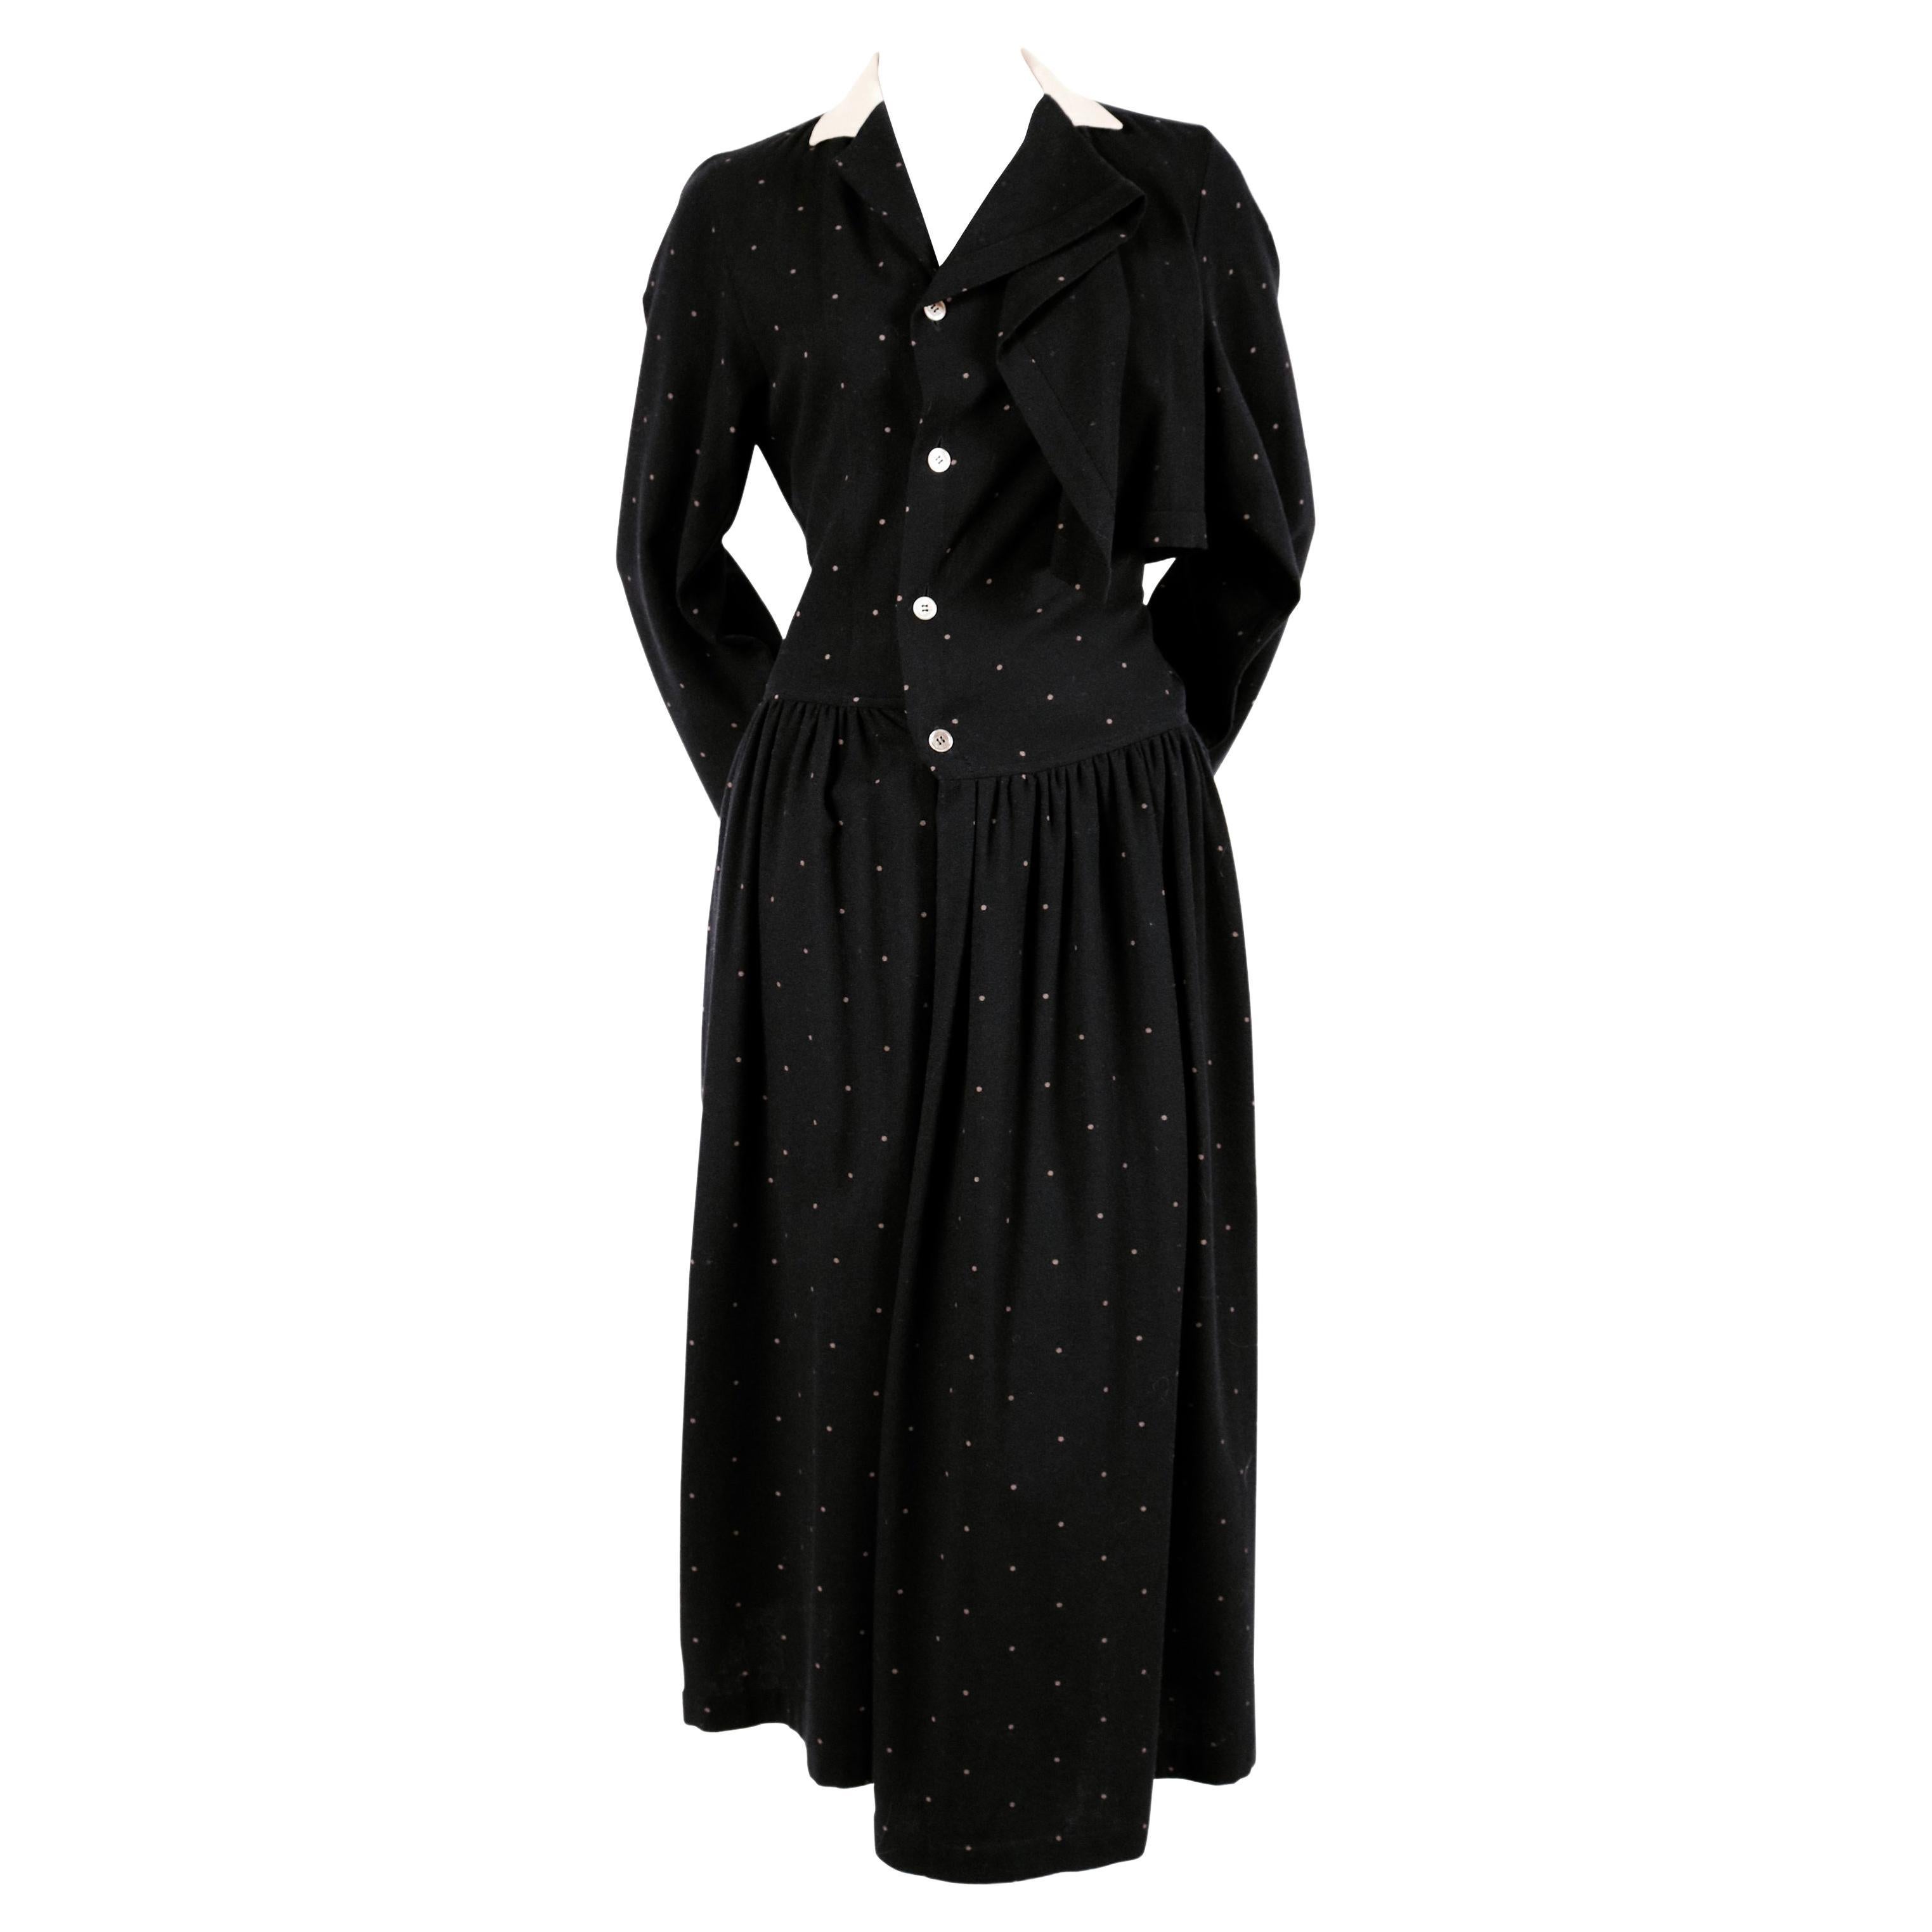 1985 COMME DES GARCONS navy wool draped dress with polka dots